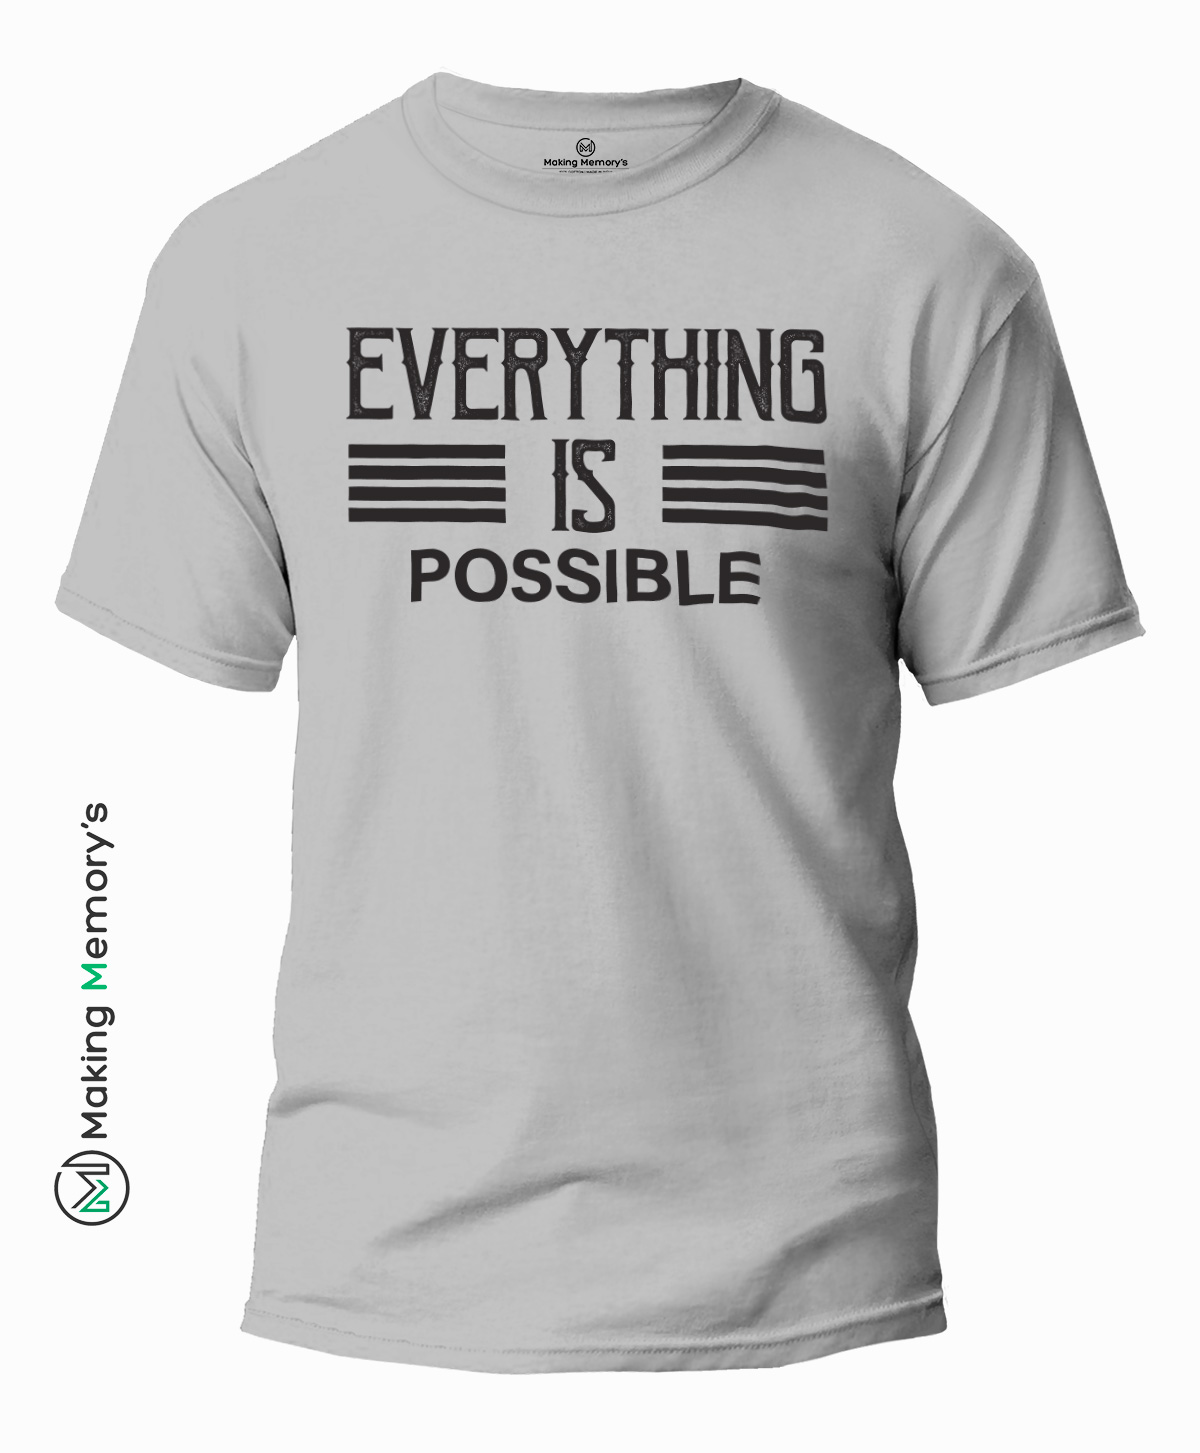 Everything-Is-Possible-Gray-T-Shirt